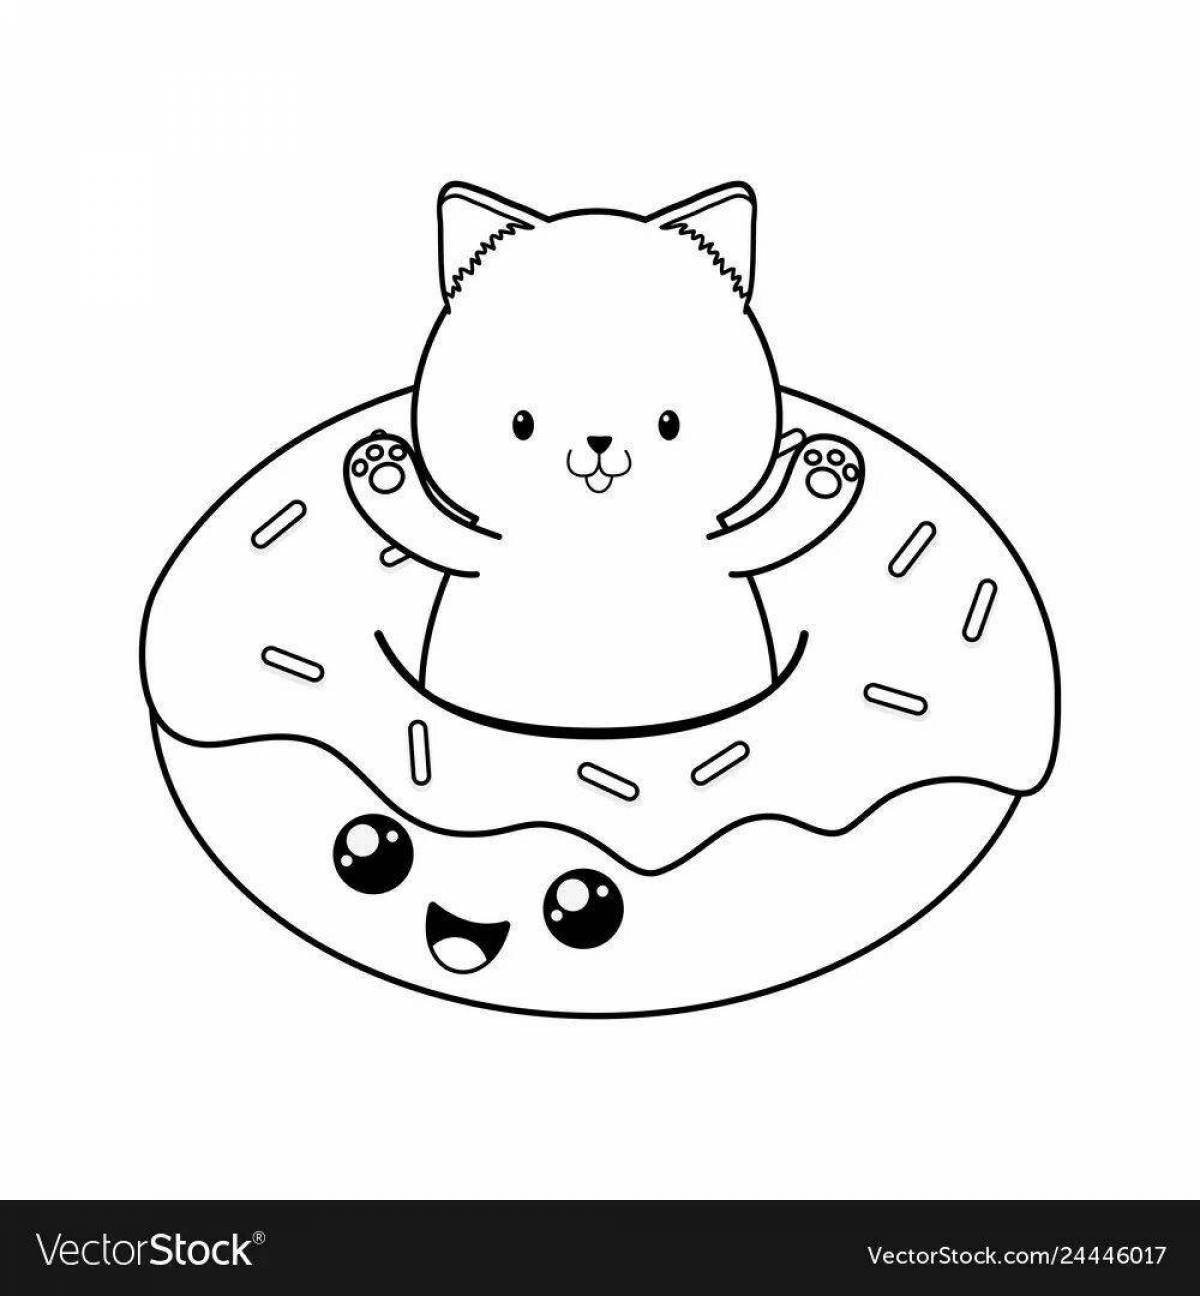 Humorous donut cat coloring page